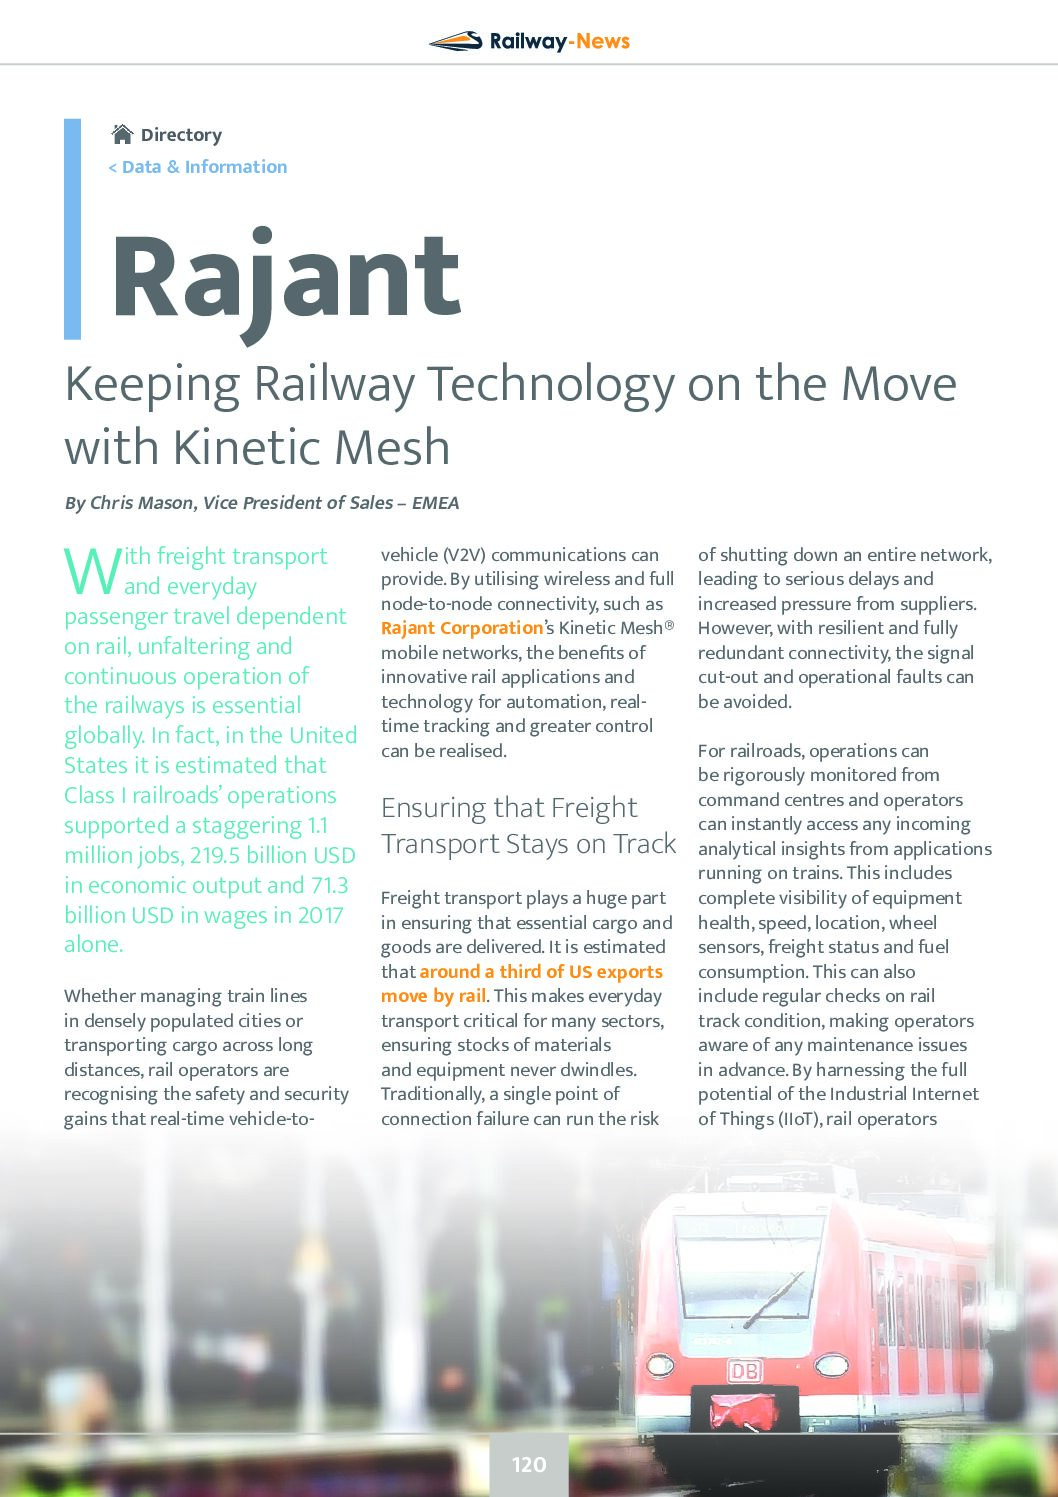 Keeping Railway Technology on the Move with Kinetic Mesh